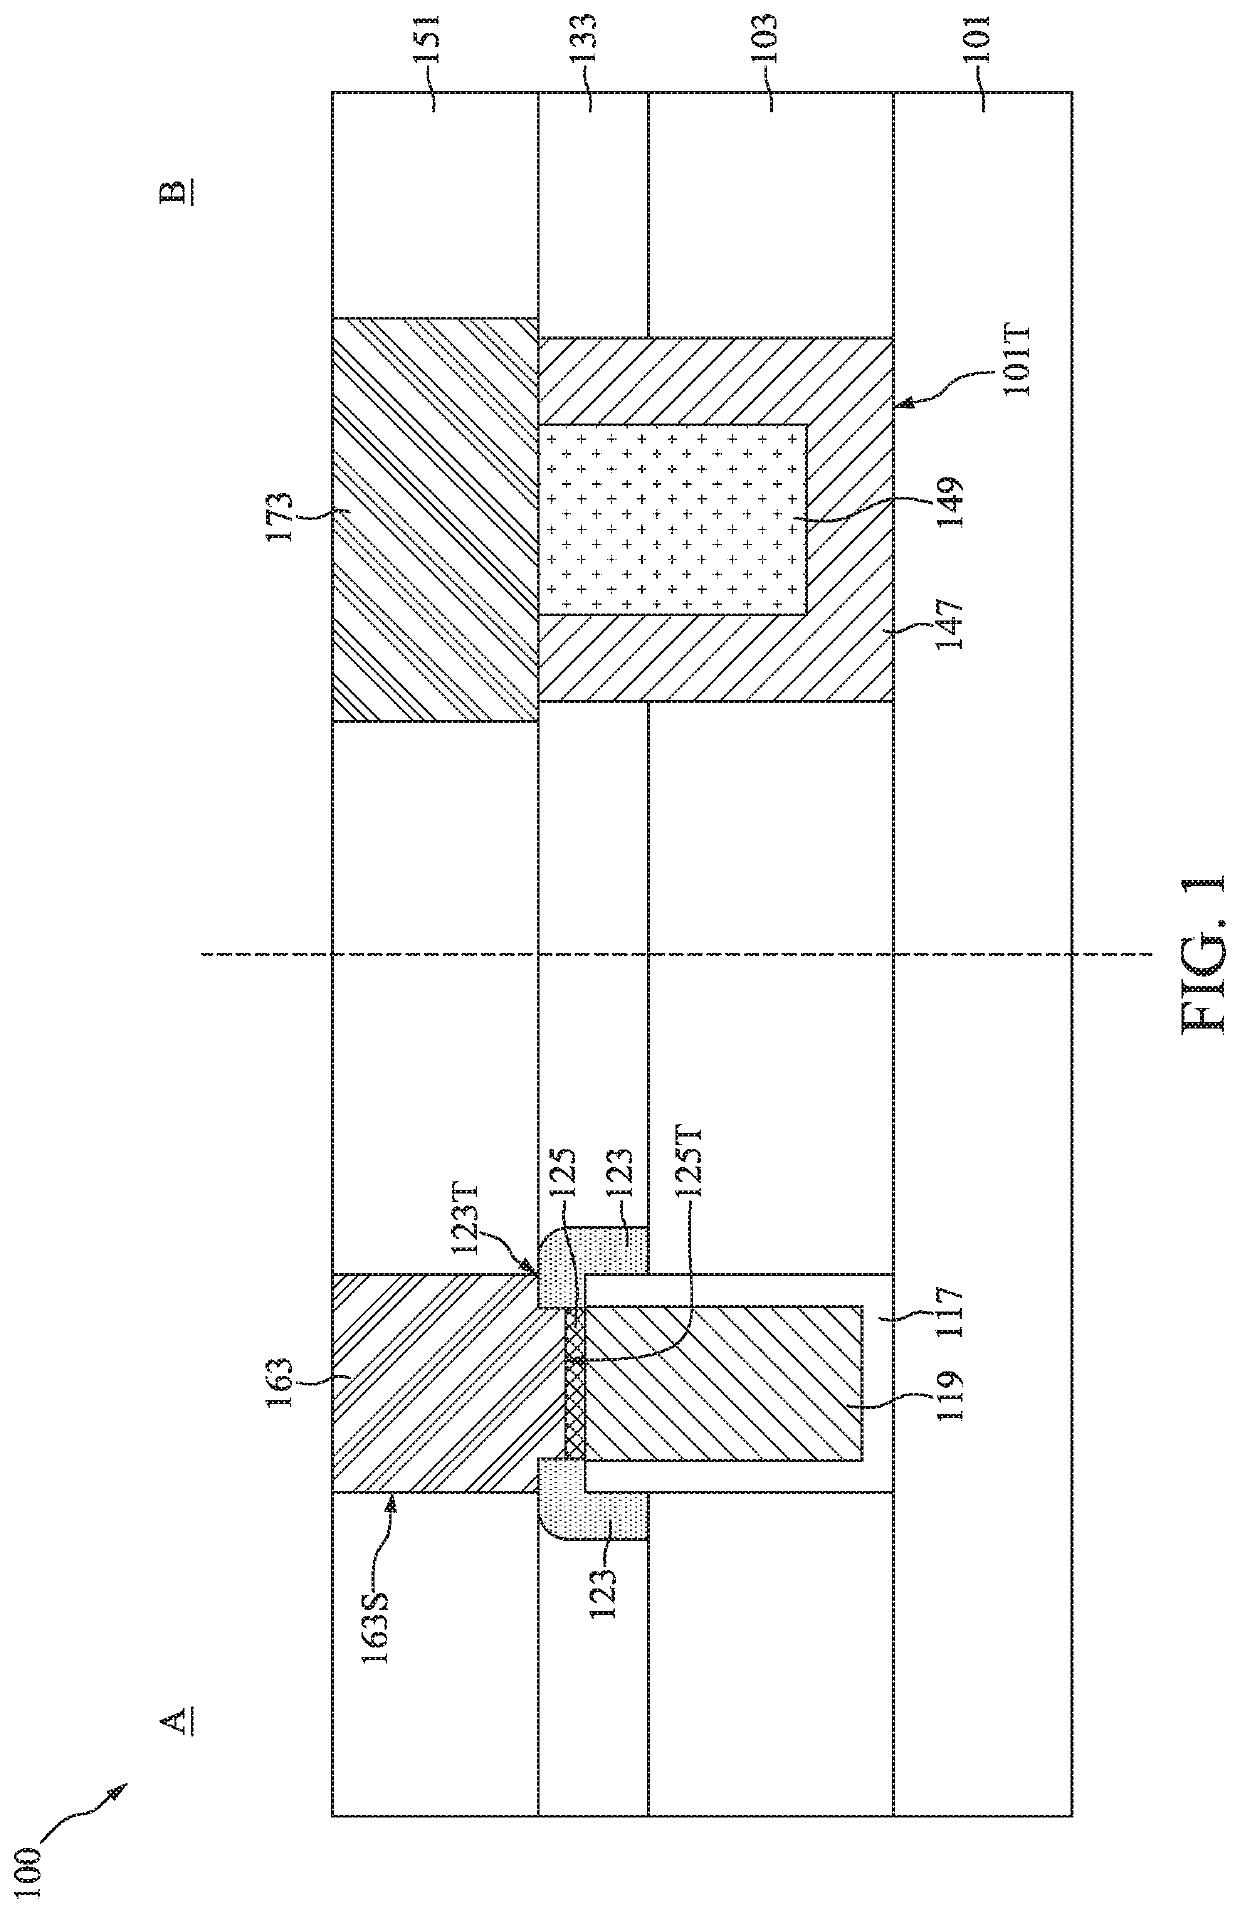 Semiconductor device with composite landing pad for metal plug